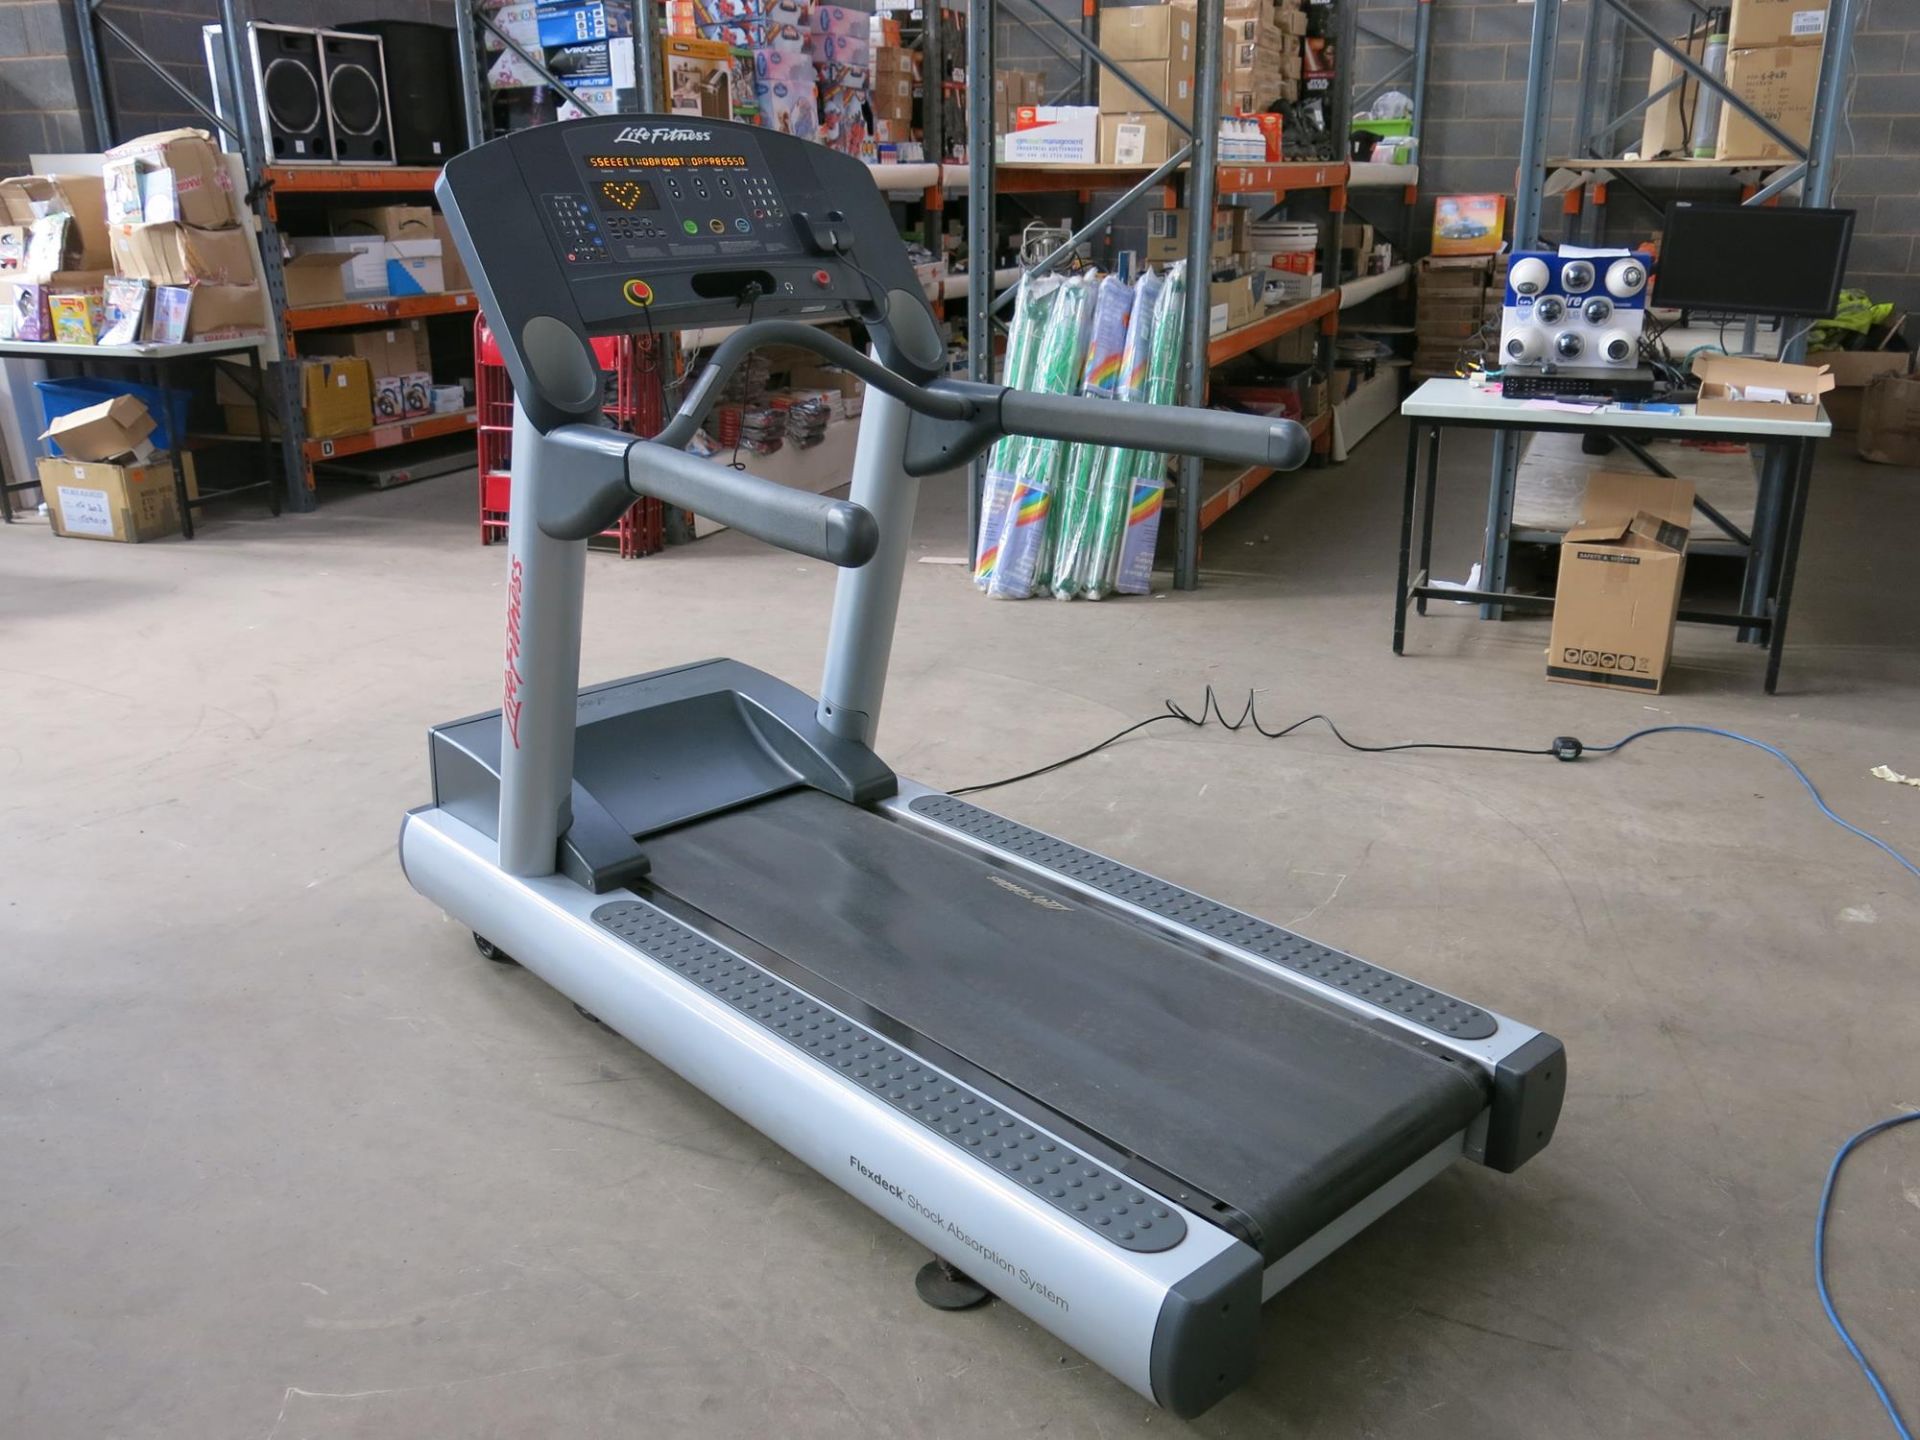 * A Life Fitness CLSTINHXK Treadmill, YOM 2013, complete with iPod docking station, incline/